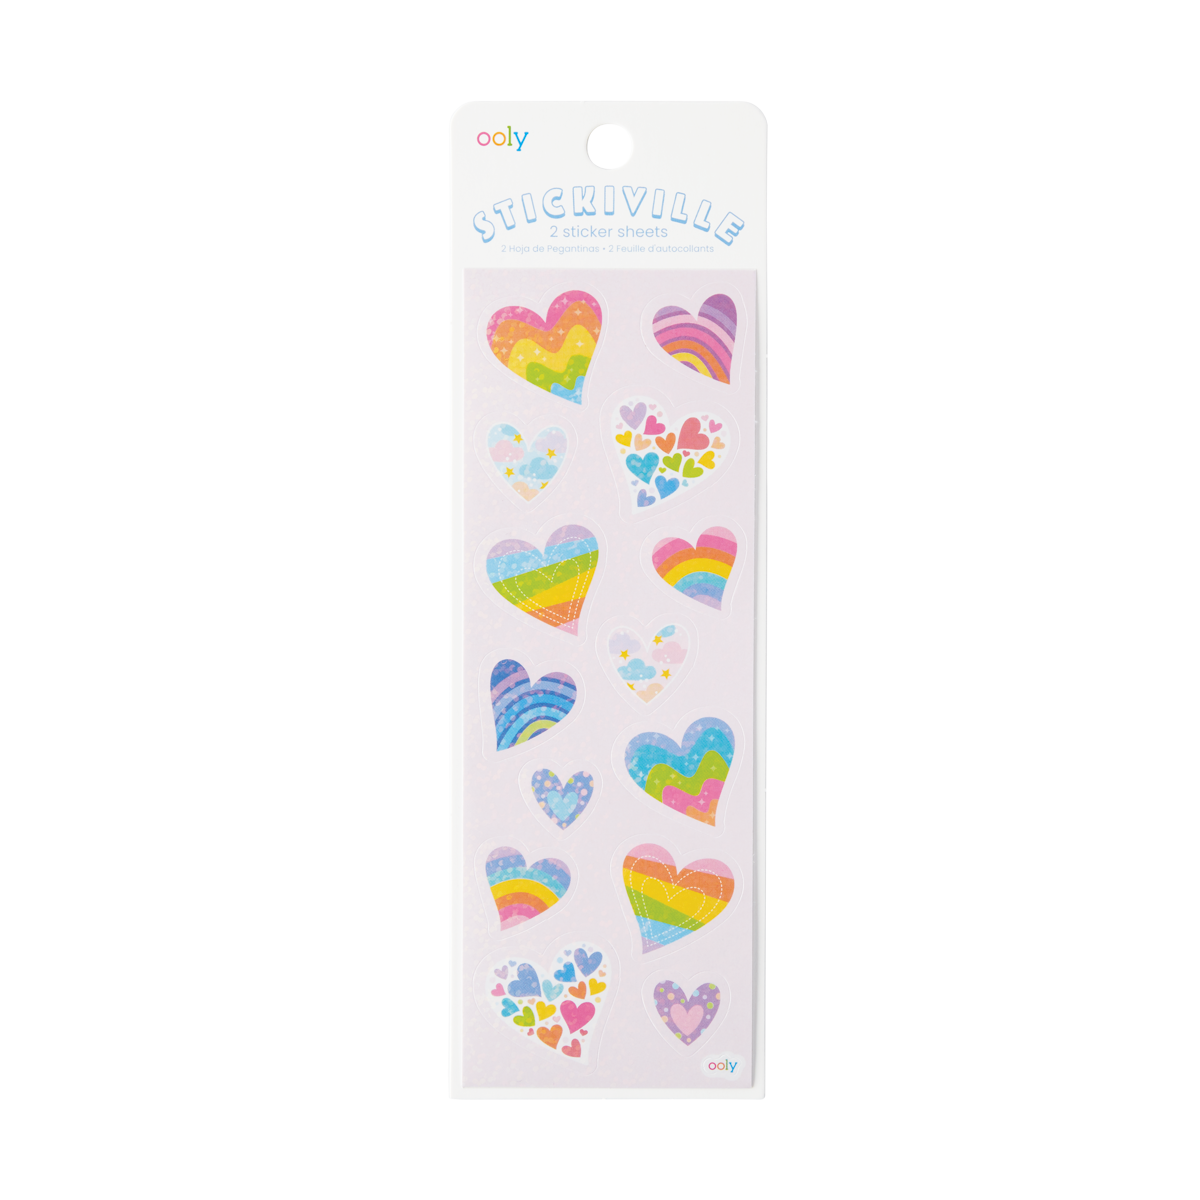 HEART TO HEART STACKING CRAYON – Bonjour Fête